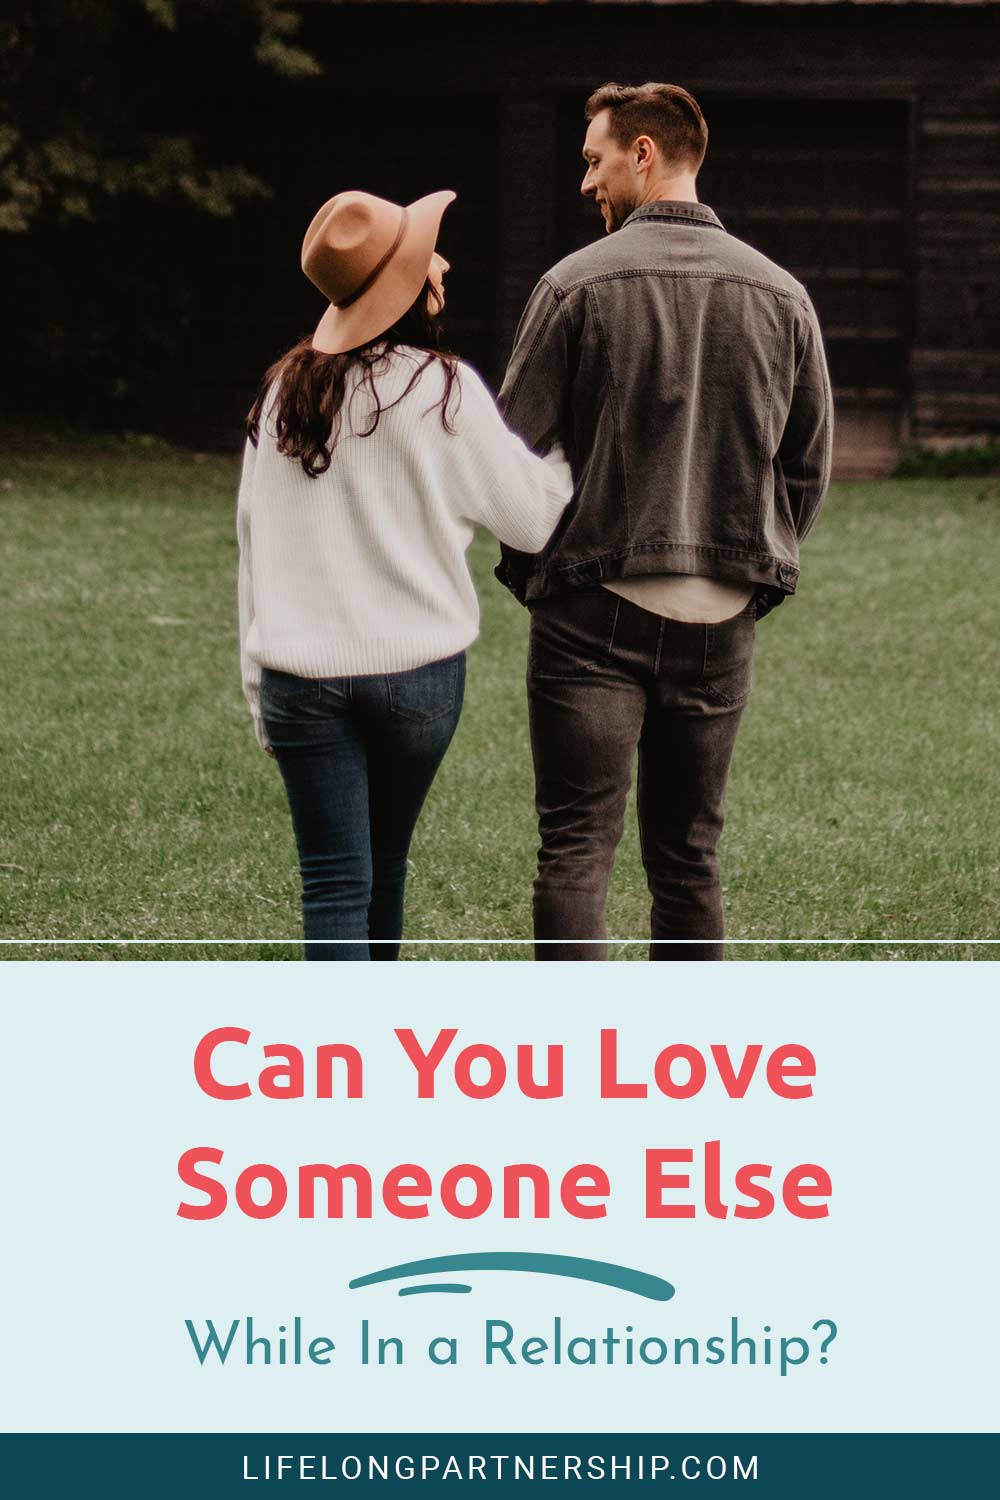 Can You Love Someone Else While In a Relationship?